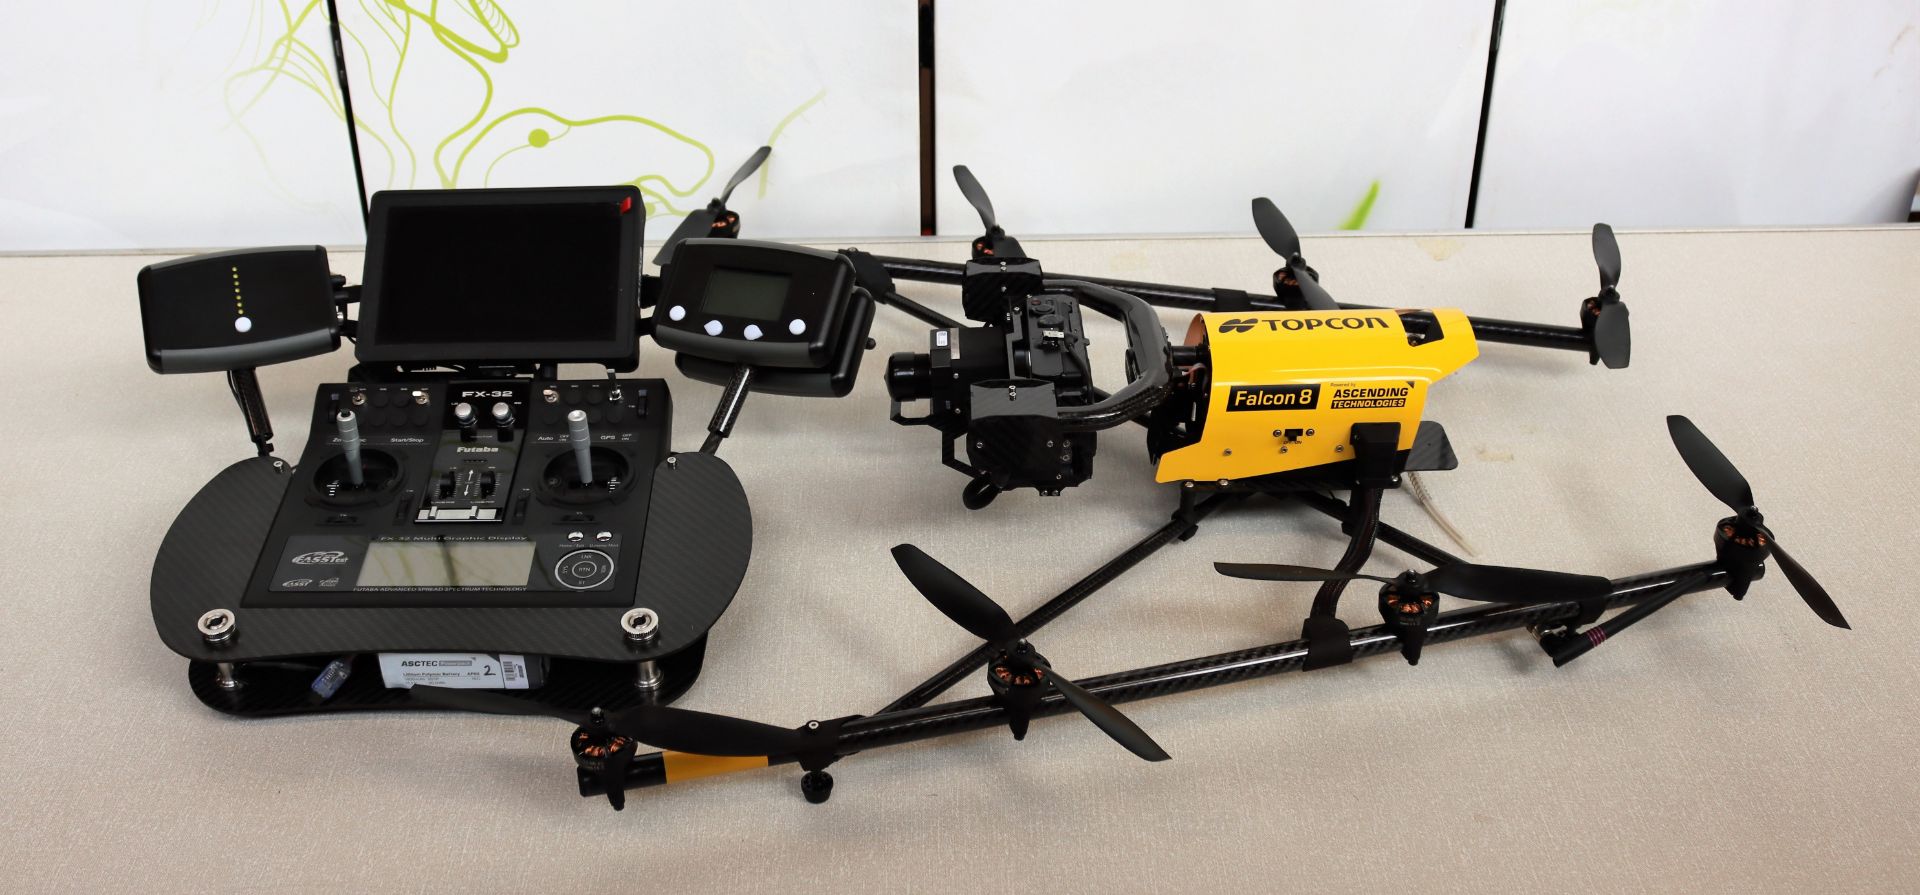 A pre-owned Topcon Falcon 8 Commercial Drone with InspectionPro payload (Infrared imaging) and loads - Image 5 of 7